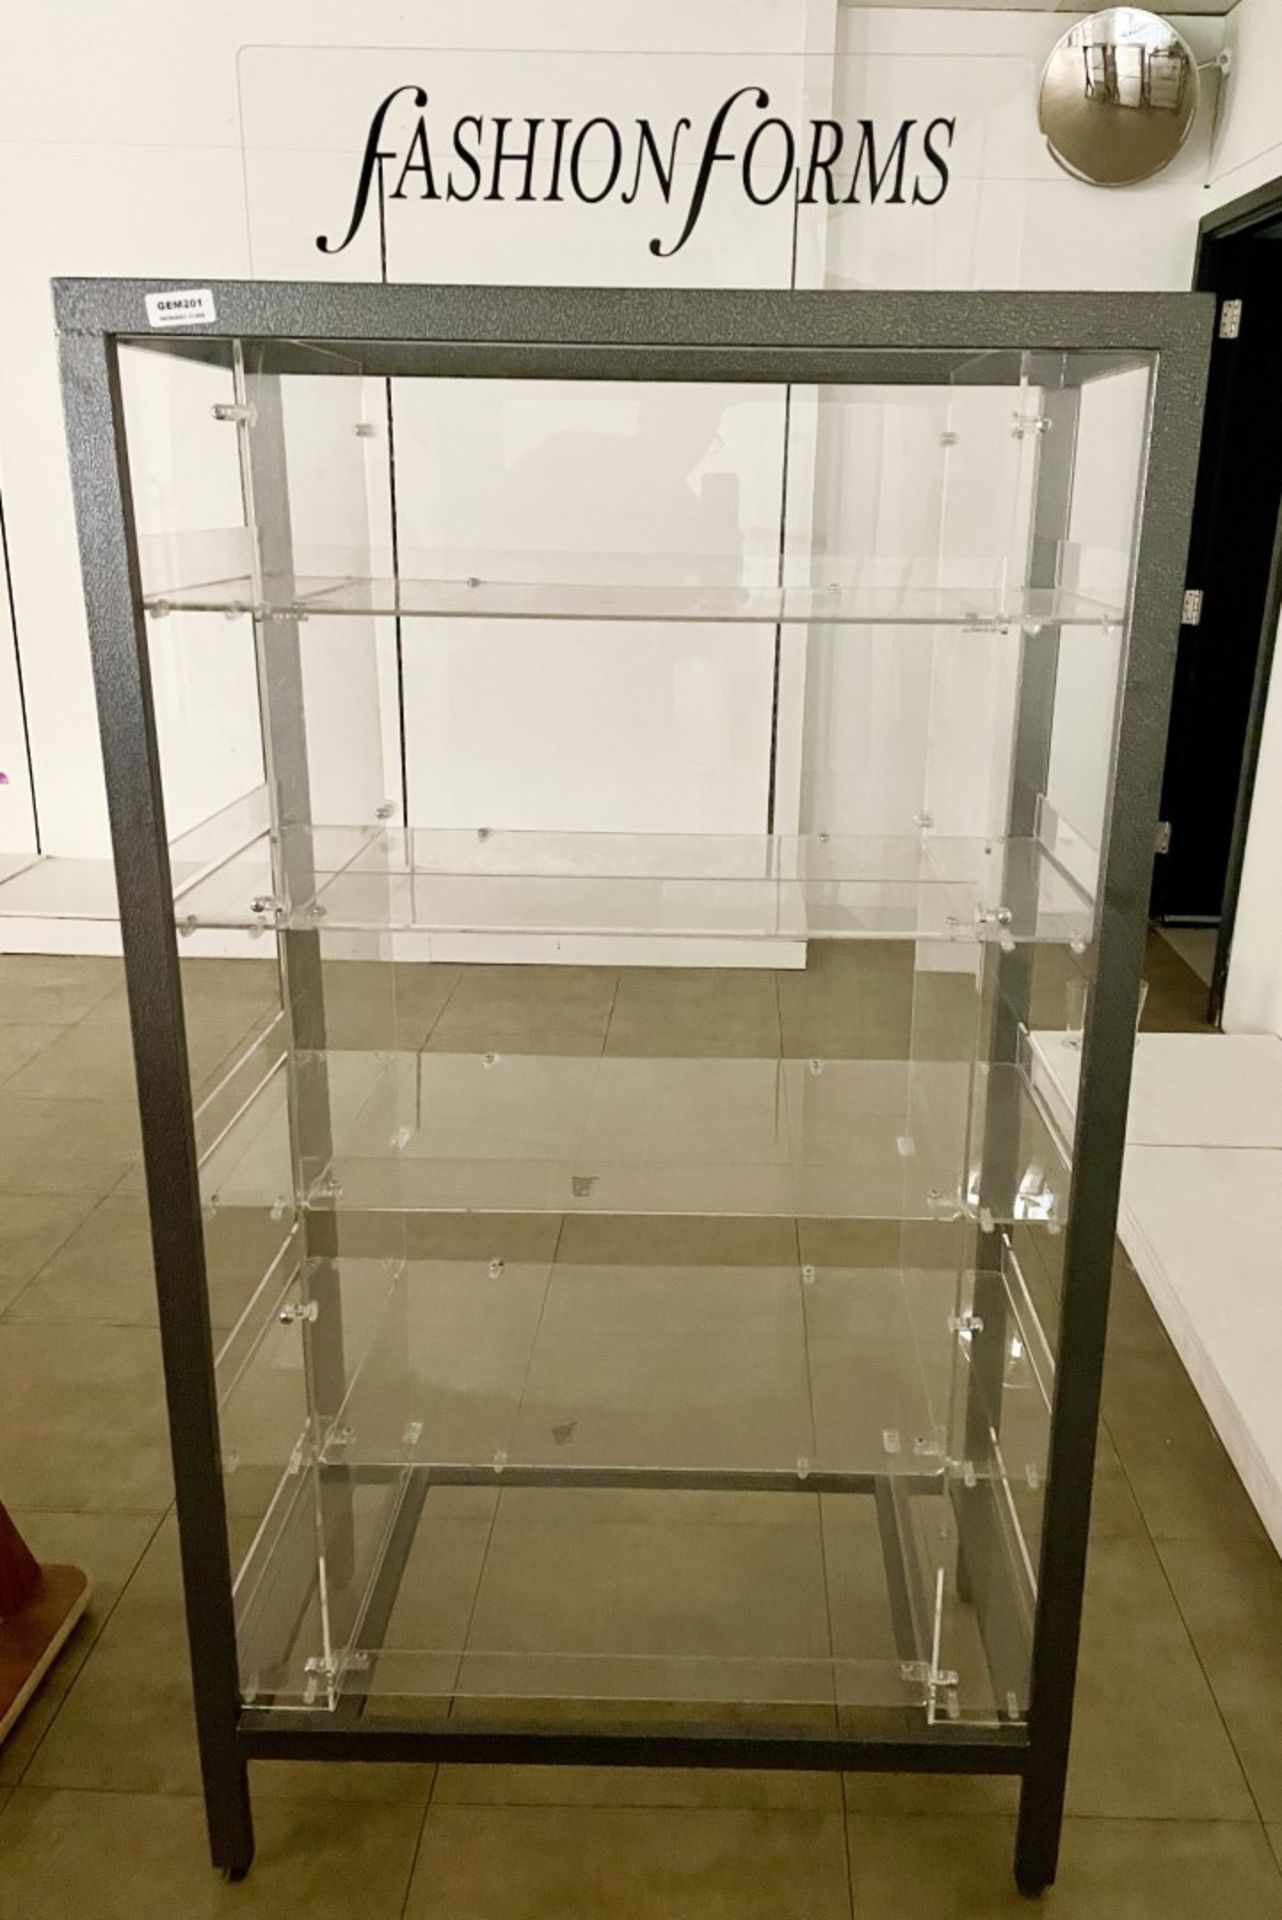 1 x Fashion Forms Display Shelf Unit With One Piece Metal Frame and Acrylic Shelves -Size H154 x W87 - Image 3 of 6